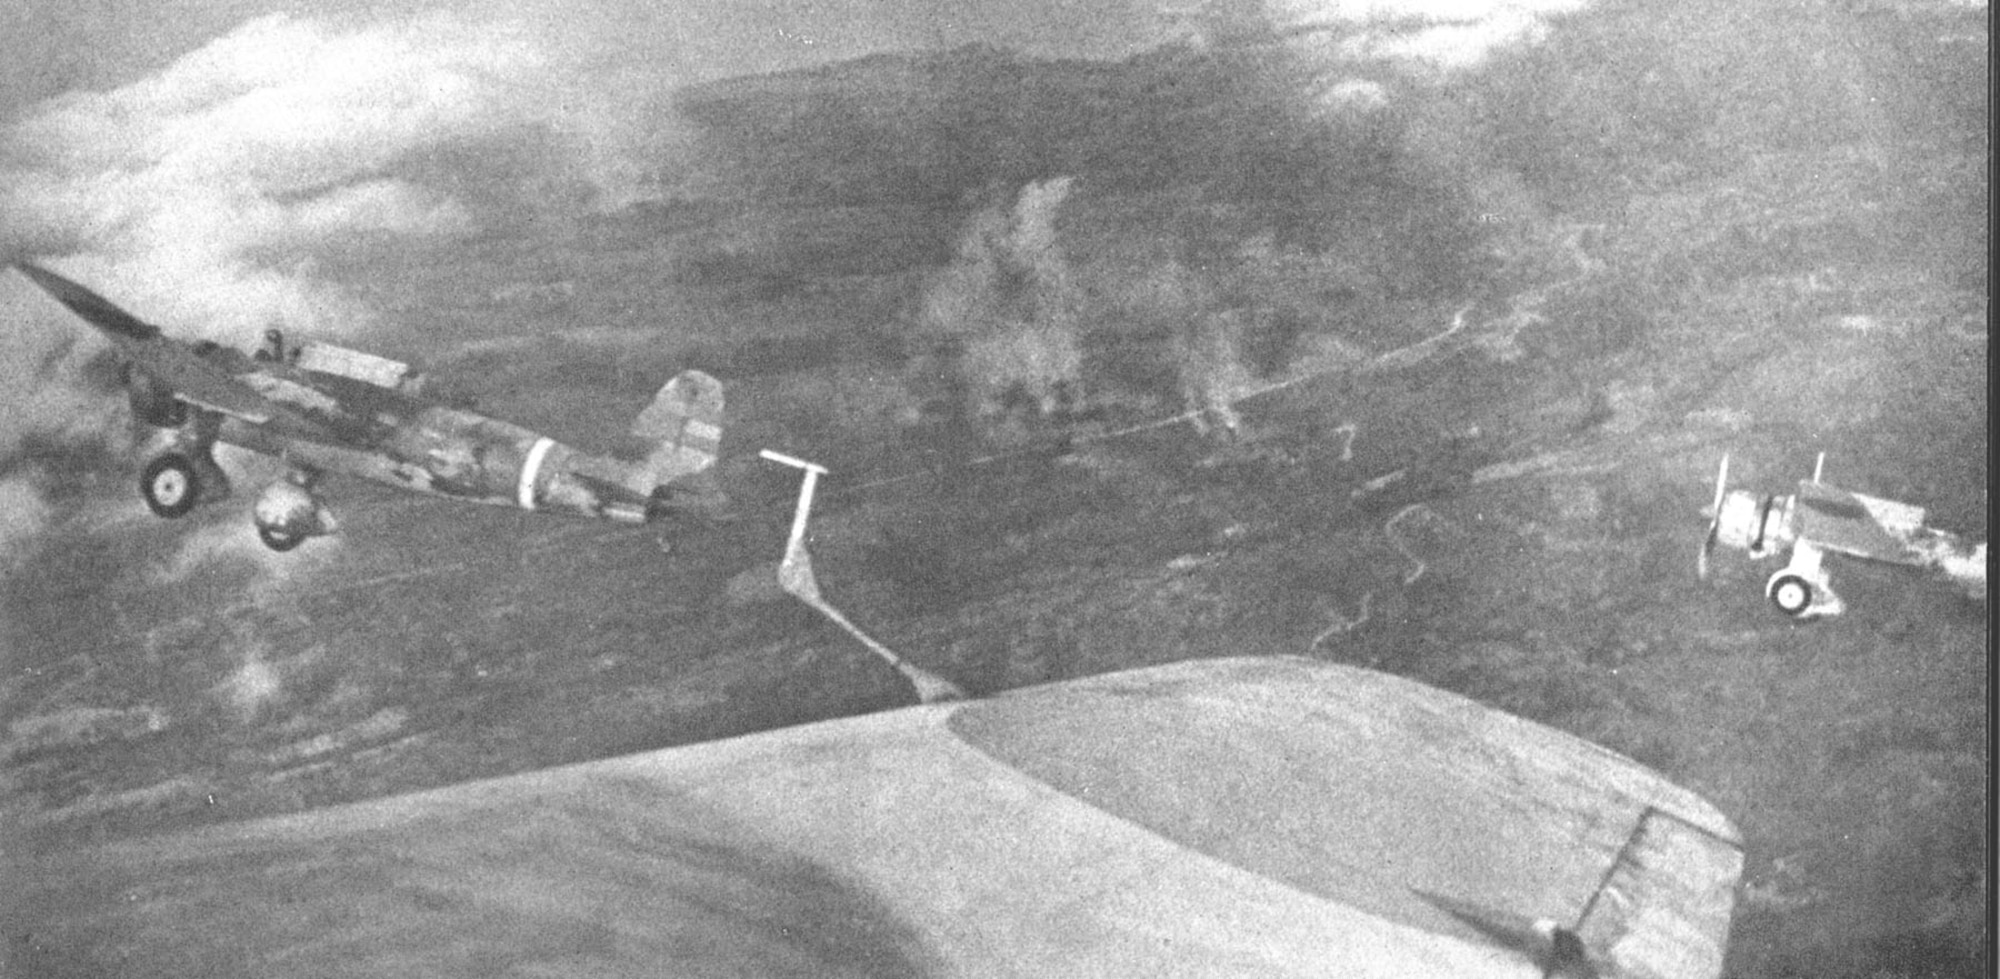 Japanese Army “Ann” bombers over the main line on Bataan. With almost total air superiority, Japanese aircraft roamed over the PACR at will. (U.S. Air Force photo)